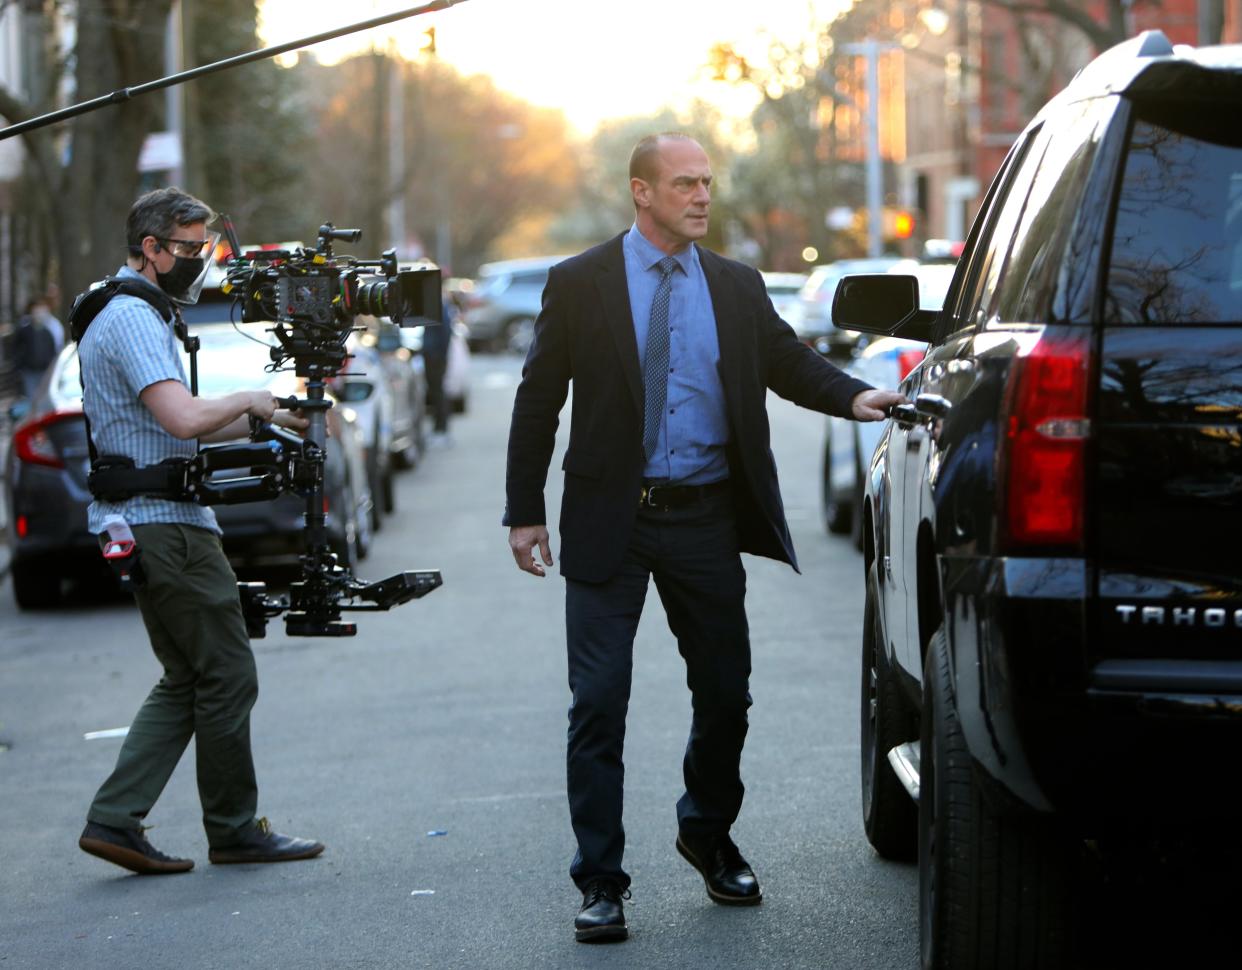 Christopher Meloni is seen back in his role as NYPD Detective Elliot Stabler on the set of "Law and Order: Organized Crime" on April 6, 2021, in New York City.